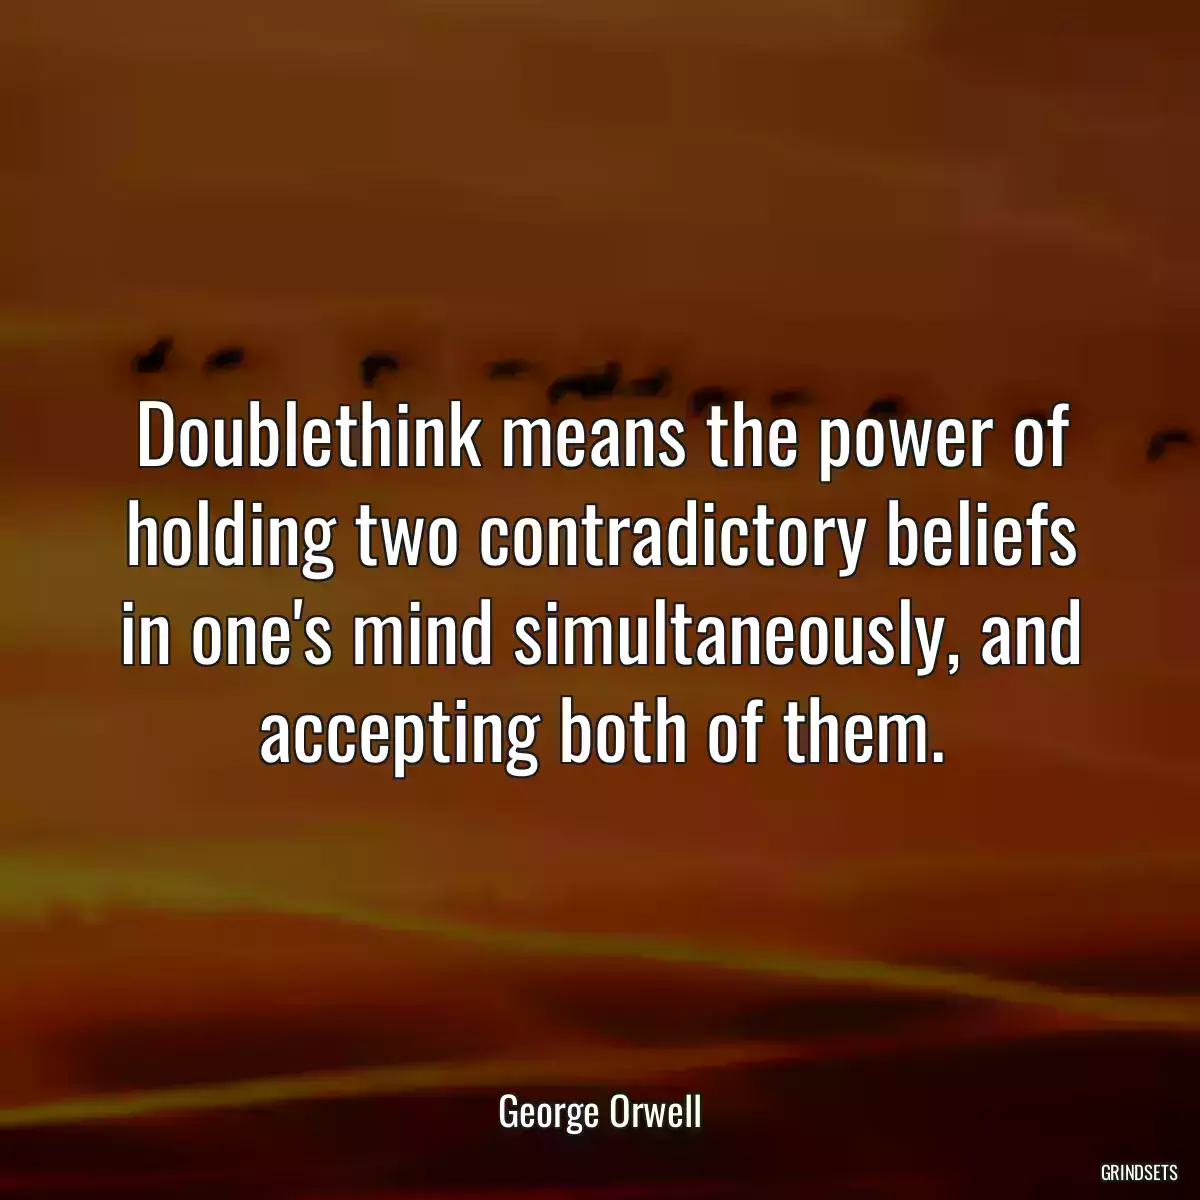 Doublethink means the power of holding two contradictory beliefs in one\'s mind simultaneously, and accepting both of them.